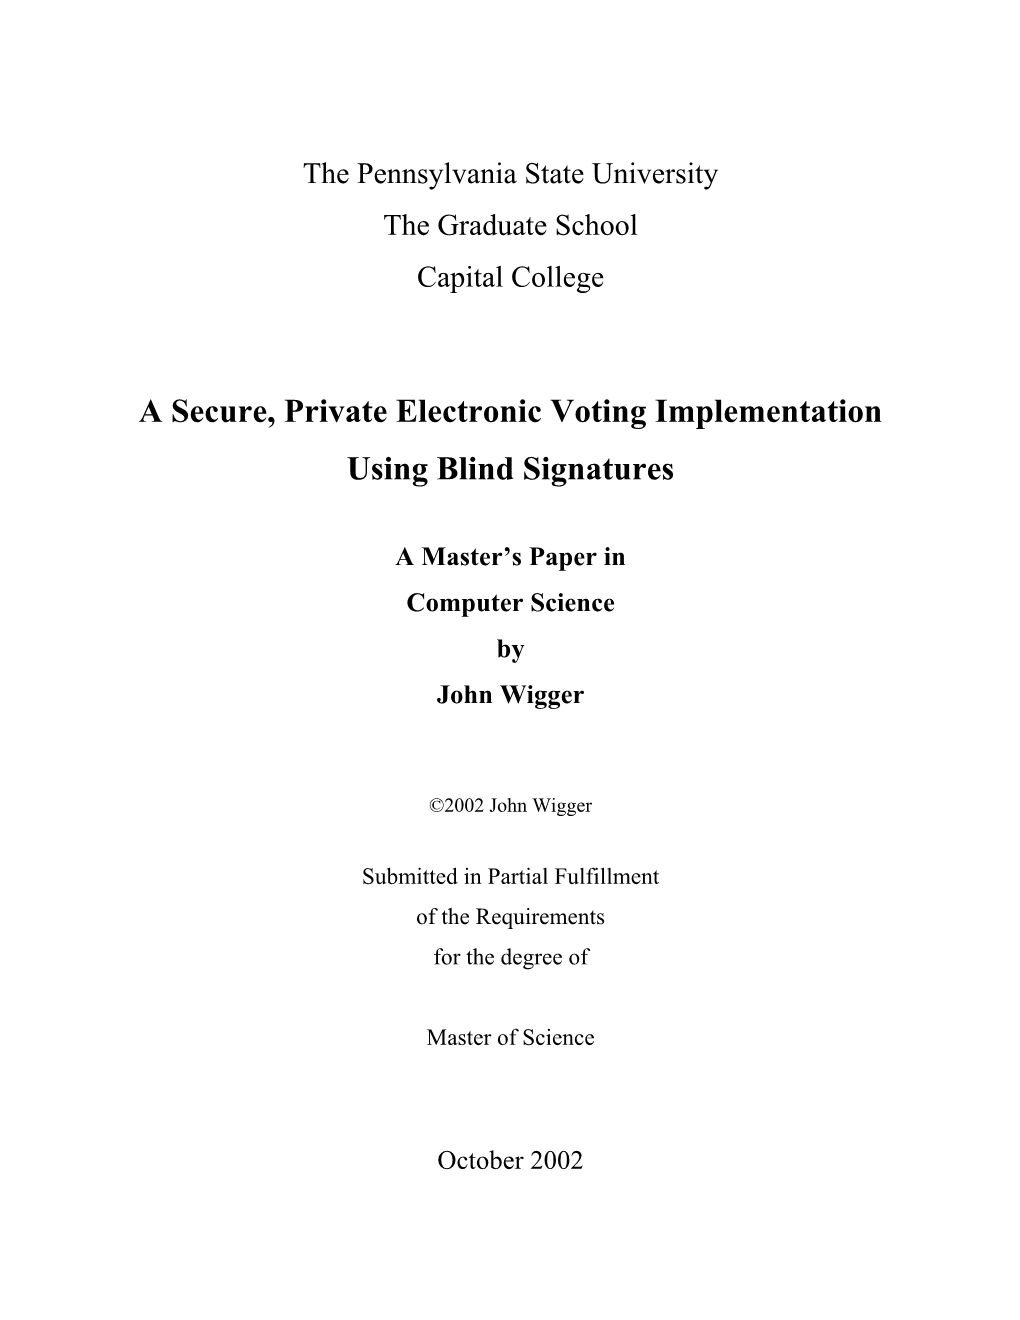 A Secure, Private Electronic Voting Implementation Using Blind Signatures